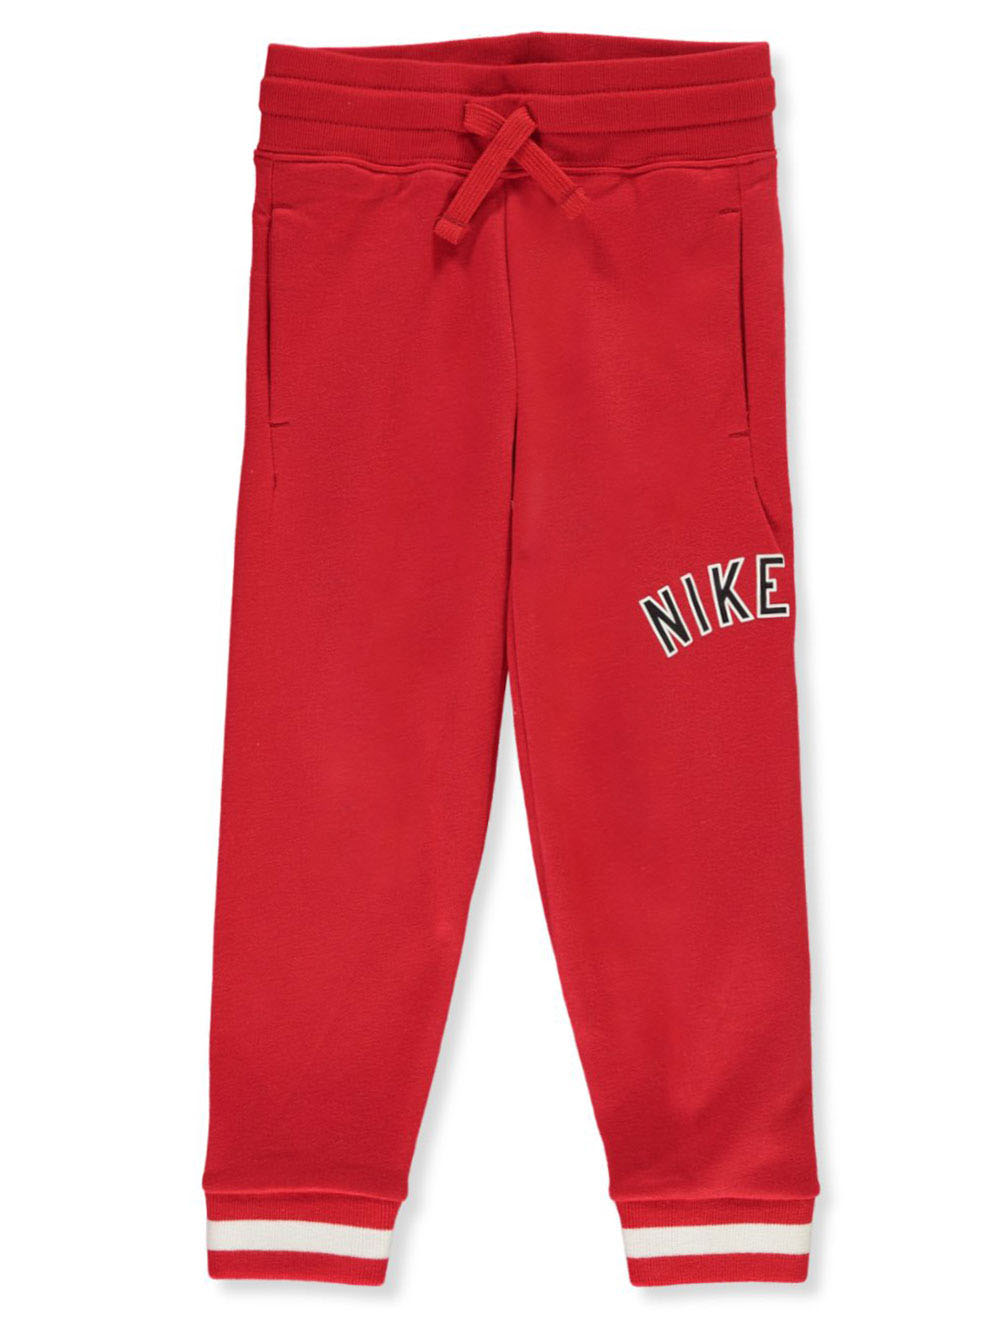 Boys' Joggers by Nike in University red 